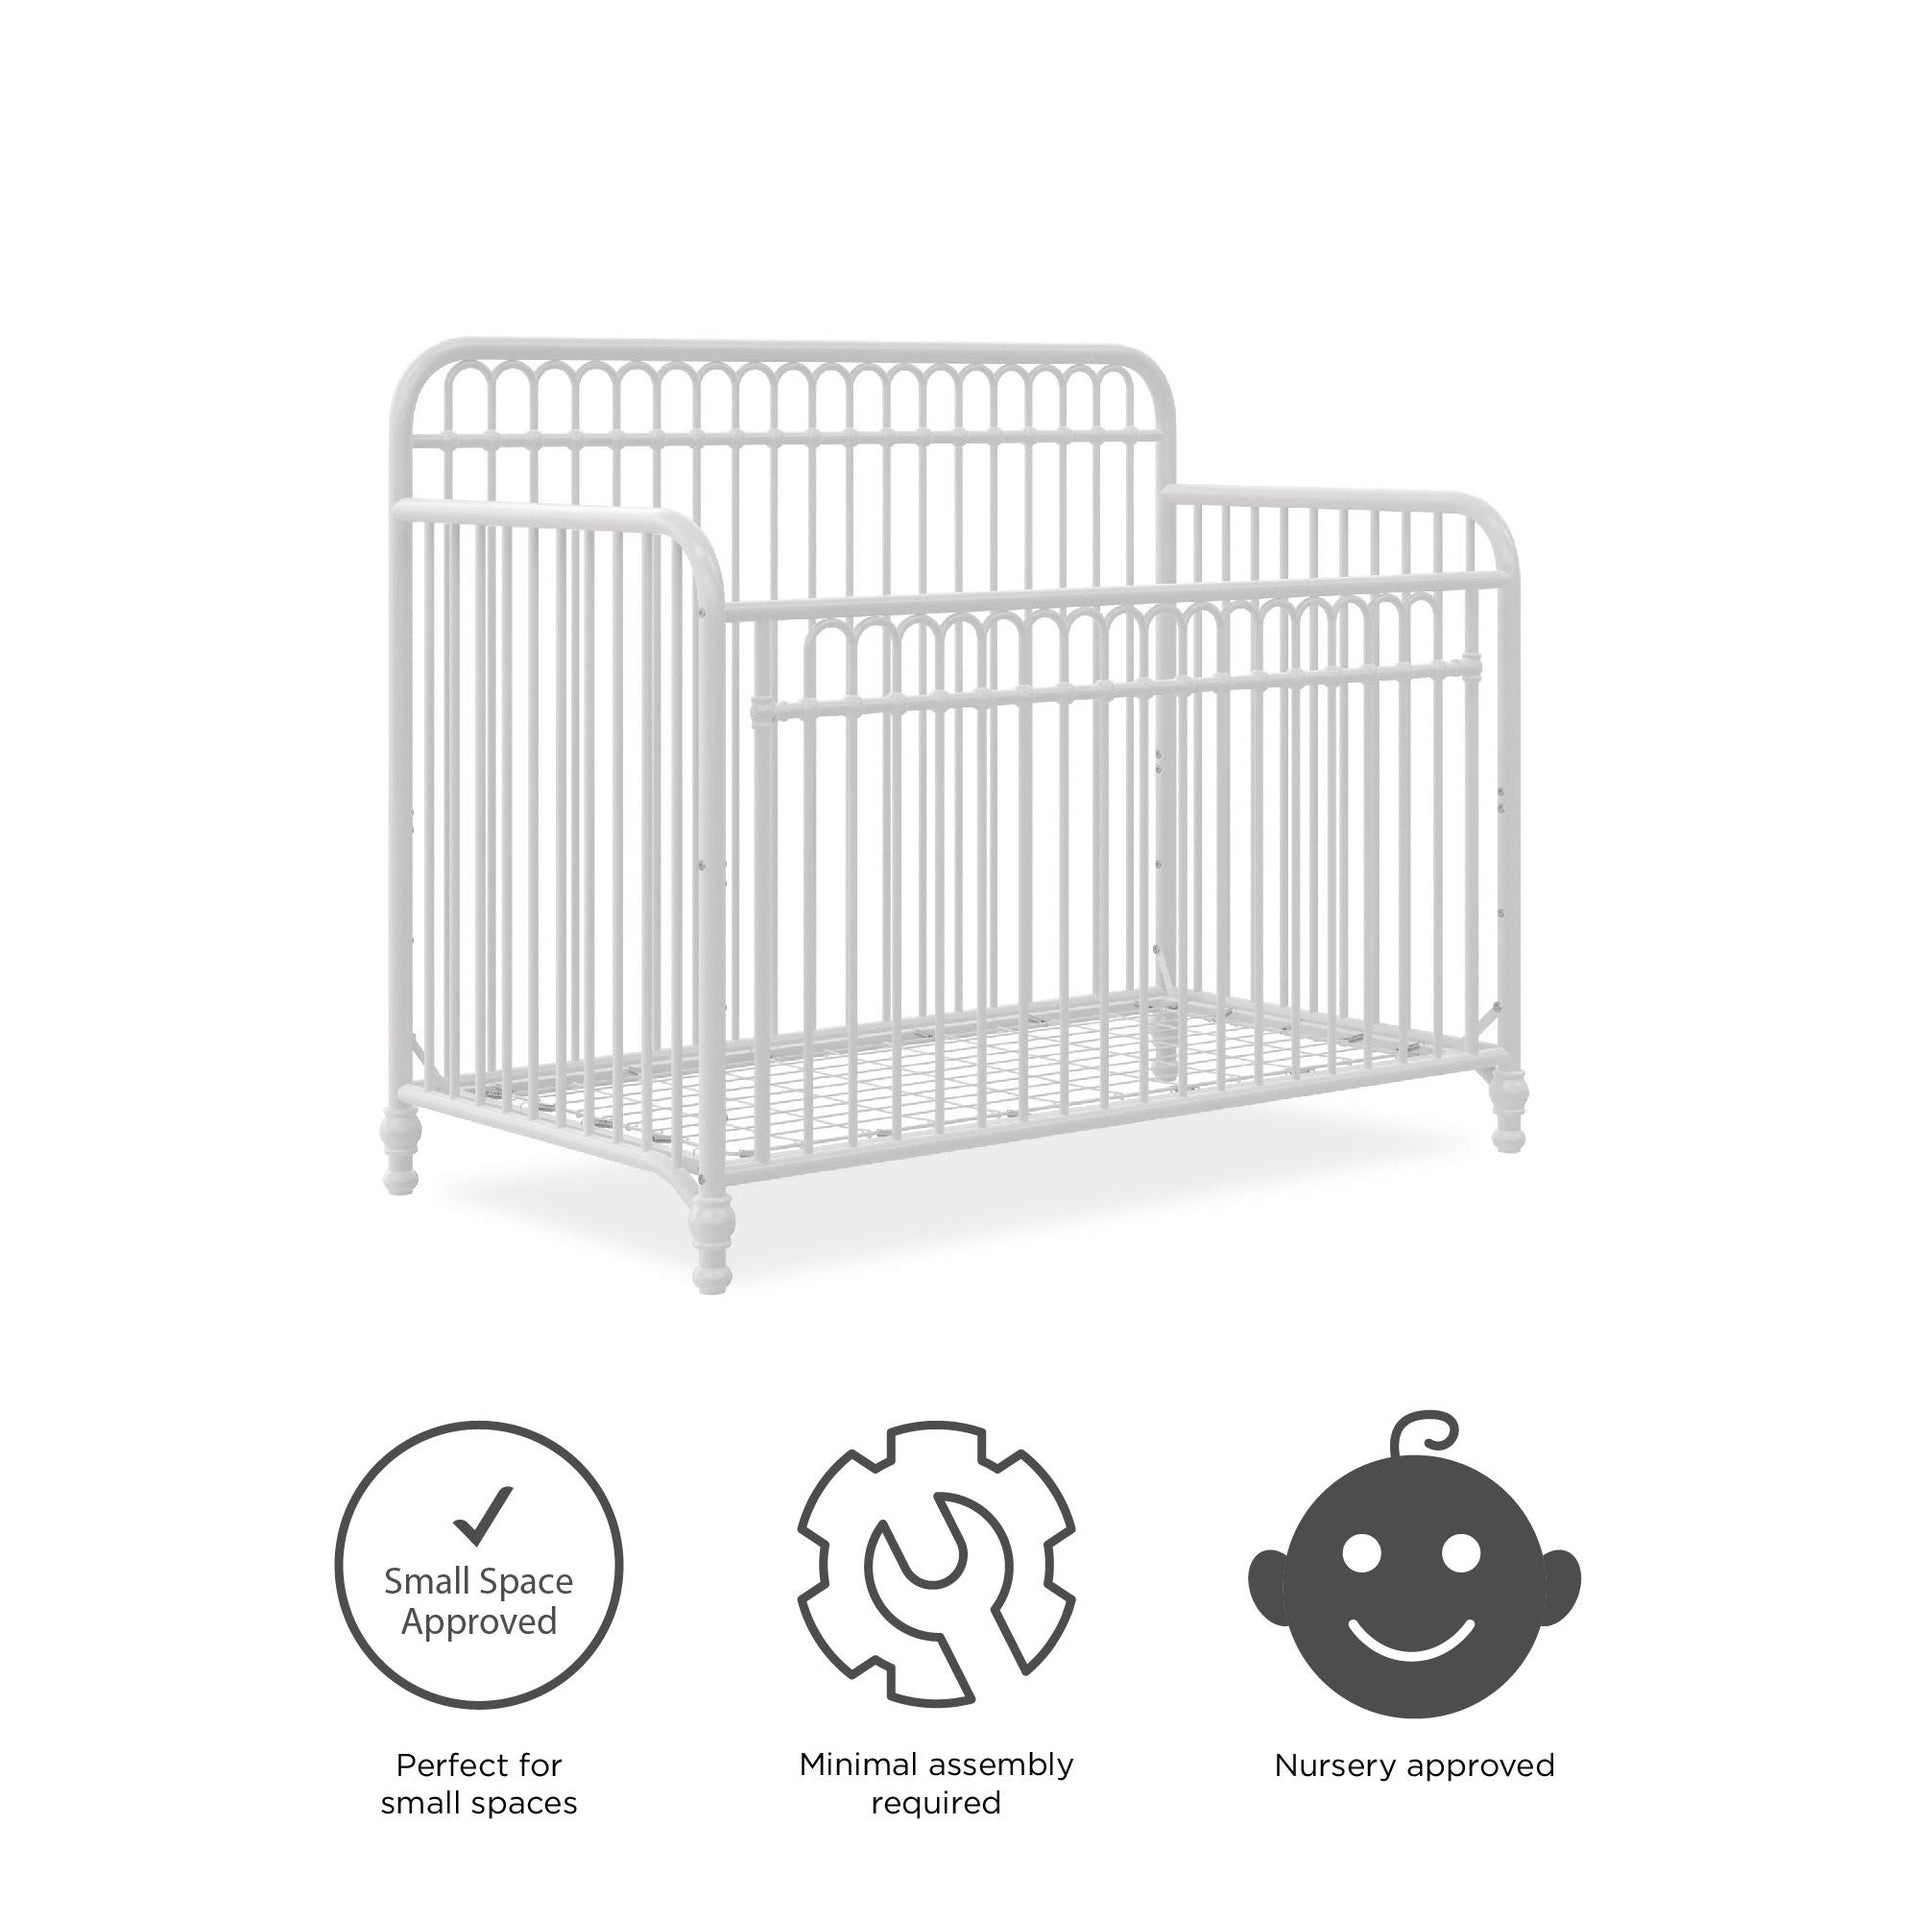 Little Seeds Ivy 3-in-1 Convertible Metal Crib - White